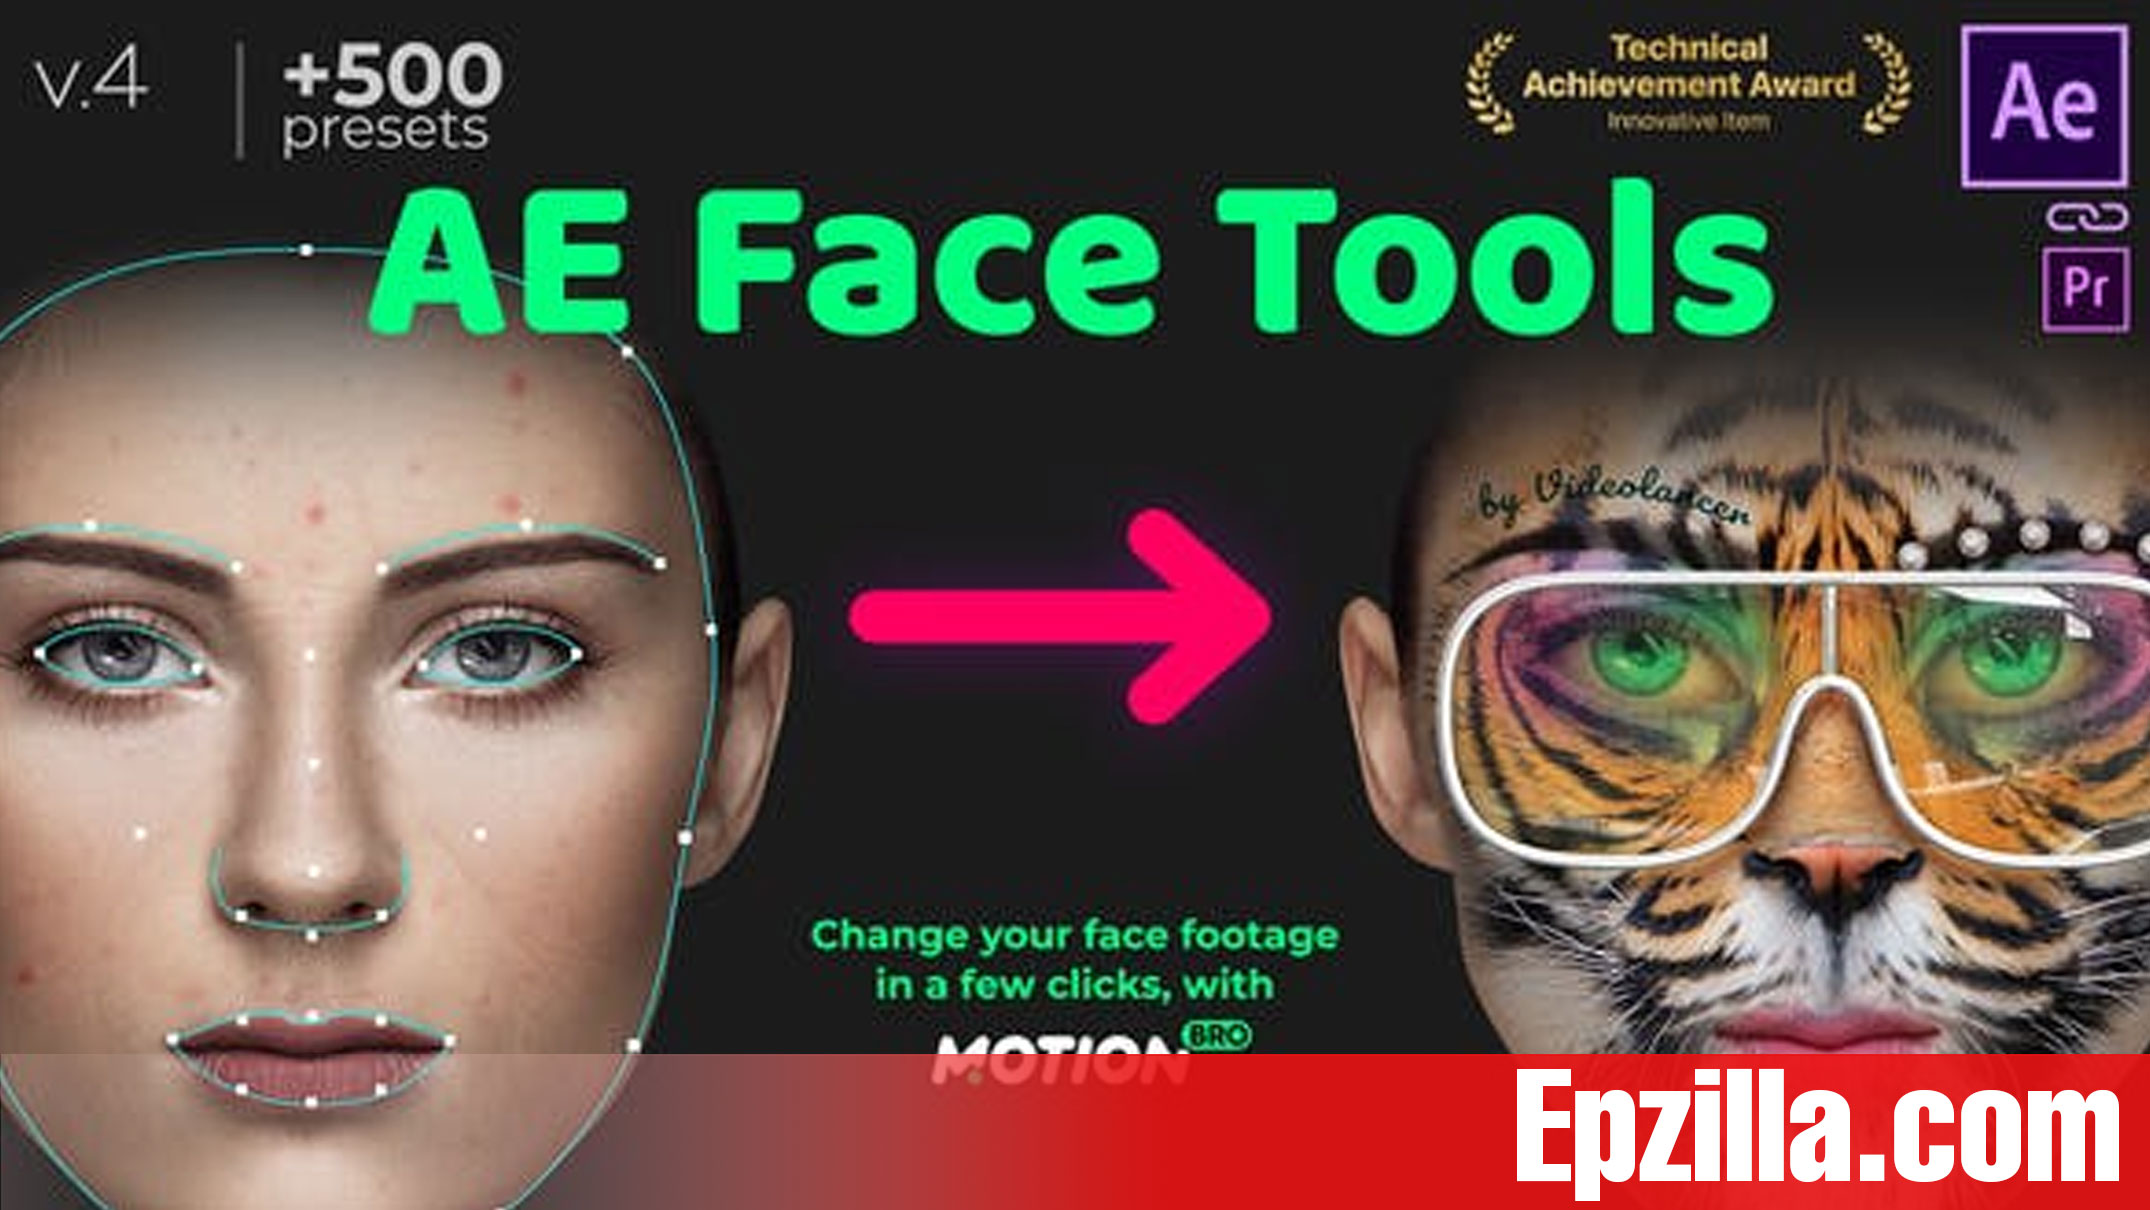 Videohive - AE Face Tools V4.1.2 24958166 Free Download From Epzilla.com